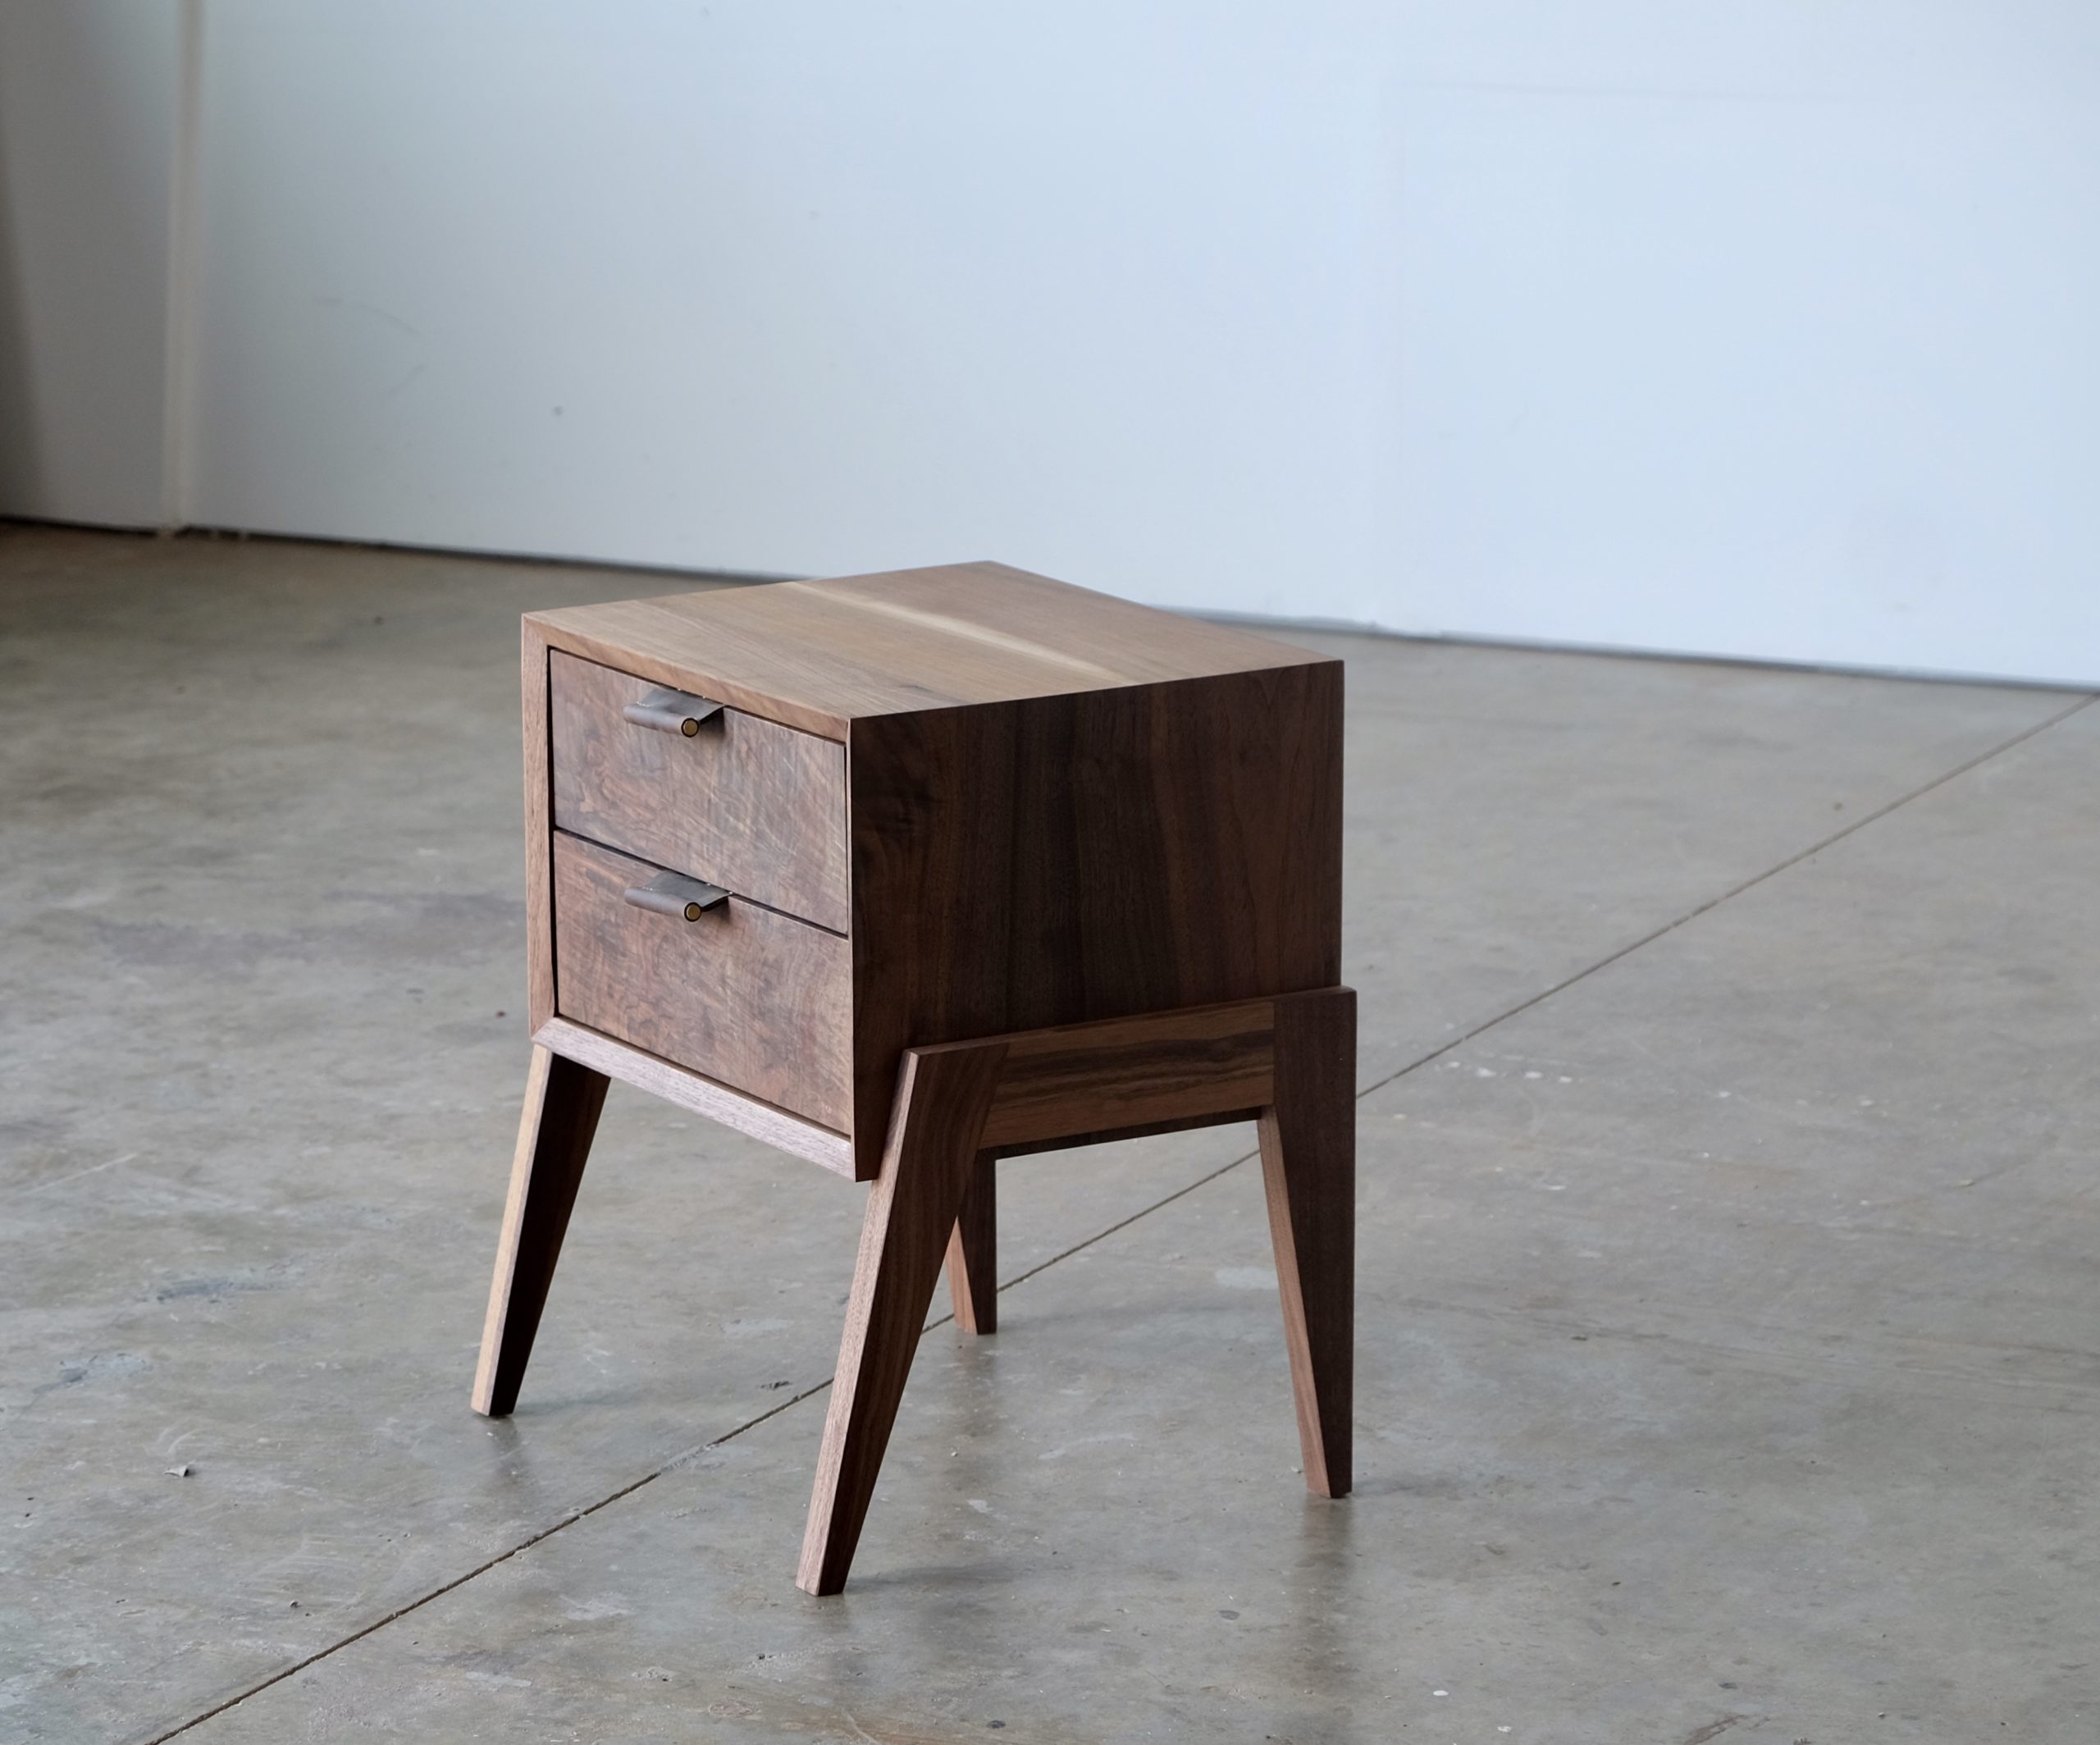 A two drawer nightstand made of solid walnut